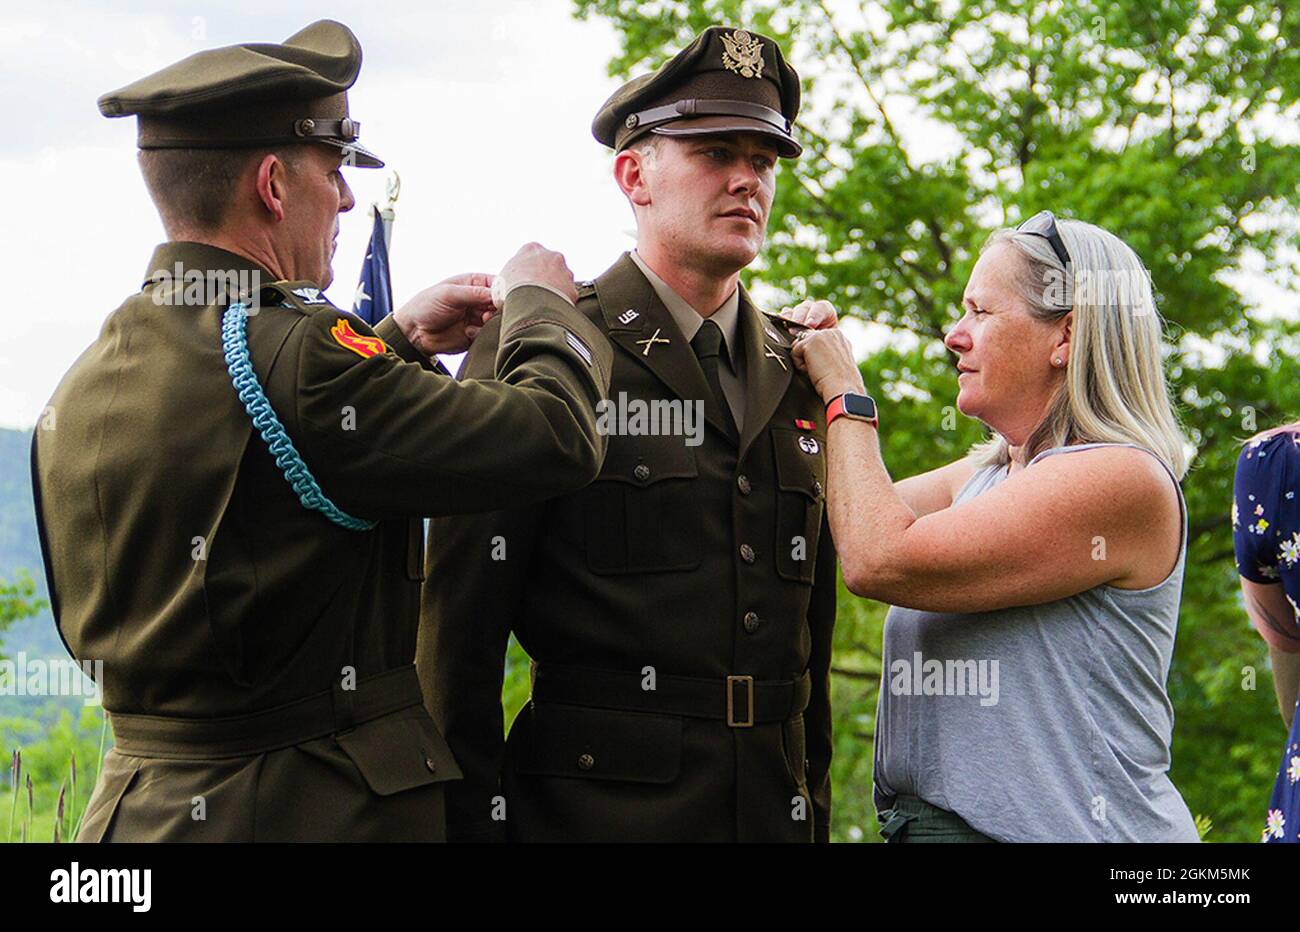 Class of 2021 Cadet and new 2nd Lt. Tully Boylan stands in the center of his parents, Col. Gregory Boylan (left), the executive officer to the Superintendent, and Colleen Boylan (right) as they pin second lieutenant bars on Tully’s shoulders following the 2021 graduation ceremony on Saturday at West Point. Tully commissioning into officership makes him a third generation West Pointer within the Boylan family lineage. He is also a third generation Infantryman, and will be a third generation “Devil in Baggy Pants” in the 504th Parachute Infantry Regiment in the 82nd Airborne Division — a regimen Stock Photo